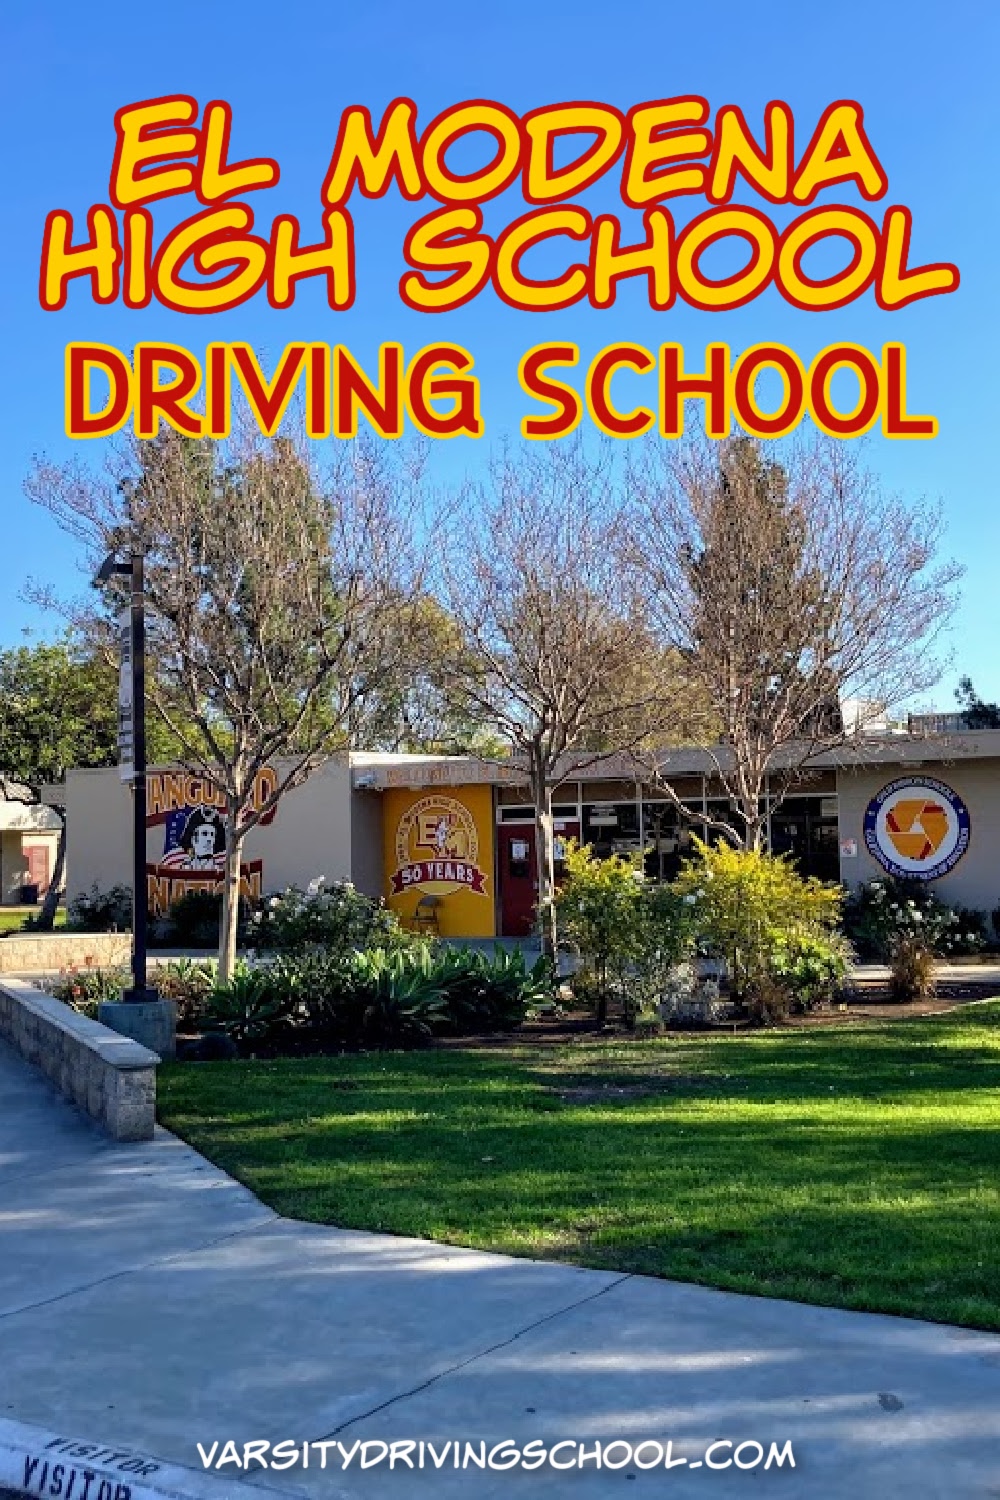 The best El Modena High School driving school is in the student’s corner every step of the way; that’s Varsity Driving School.